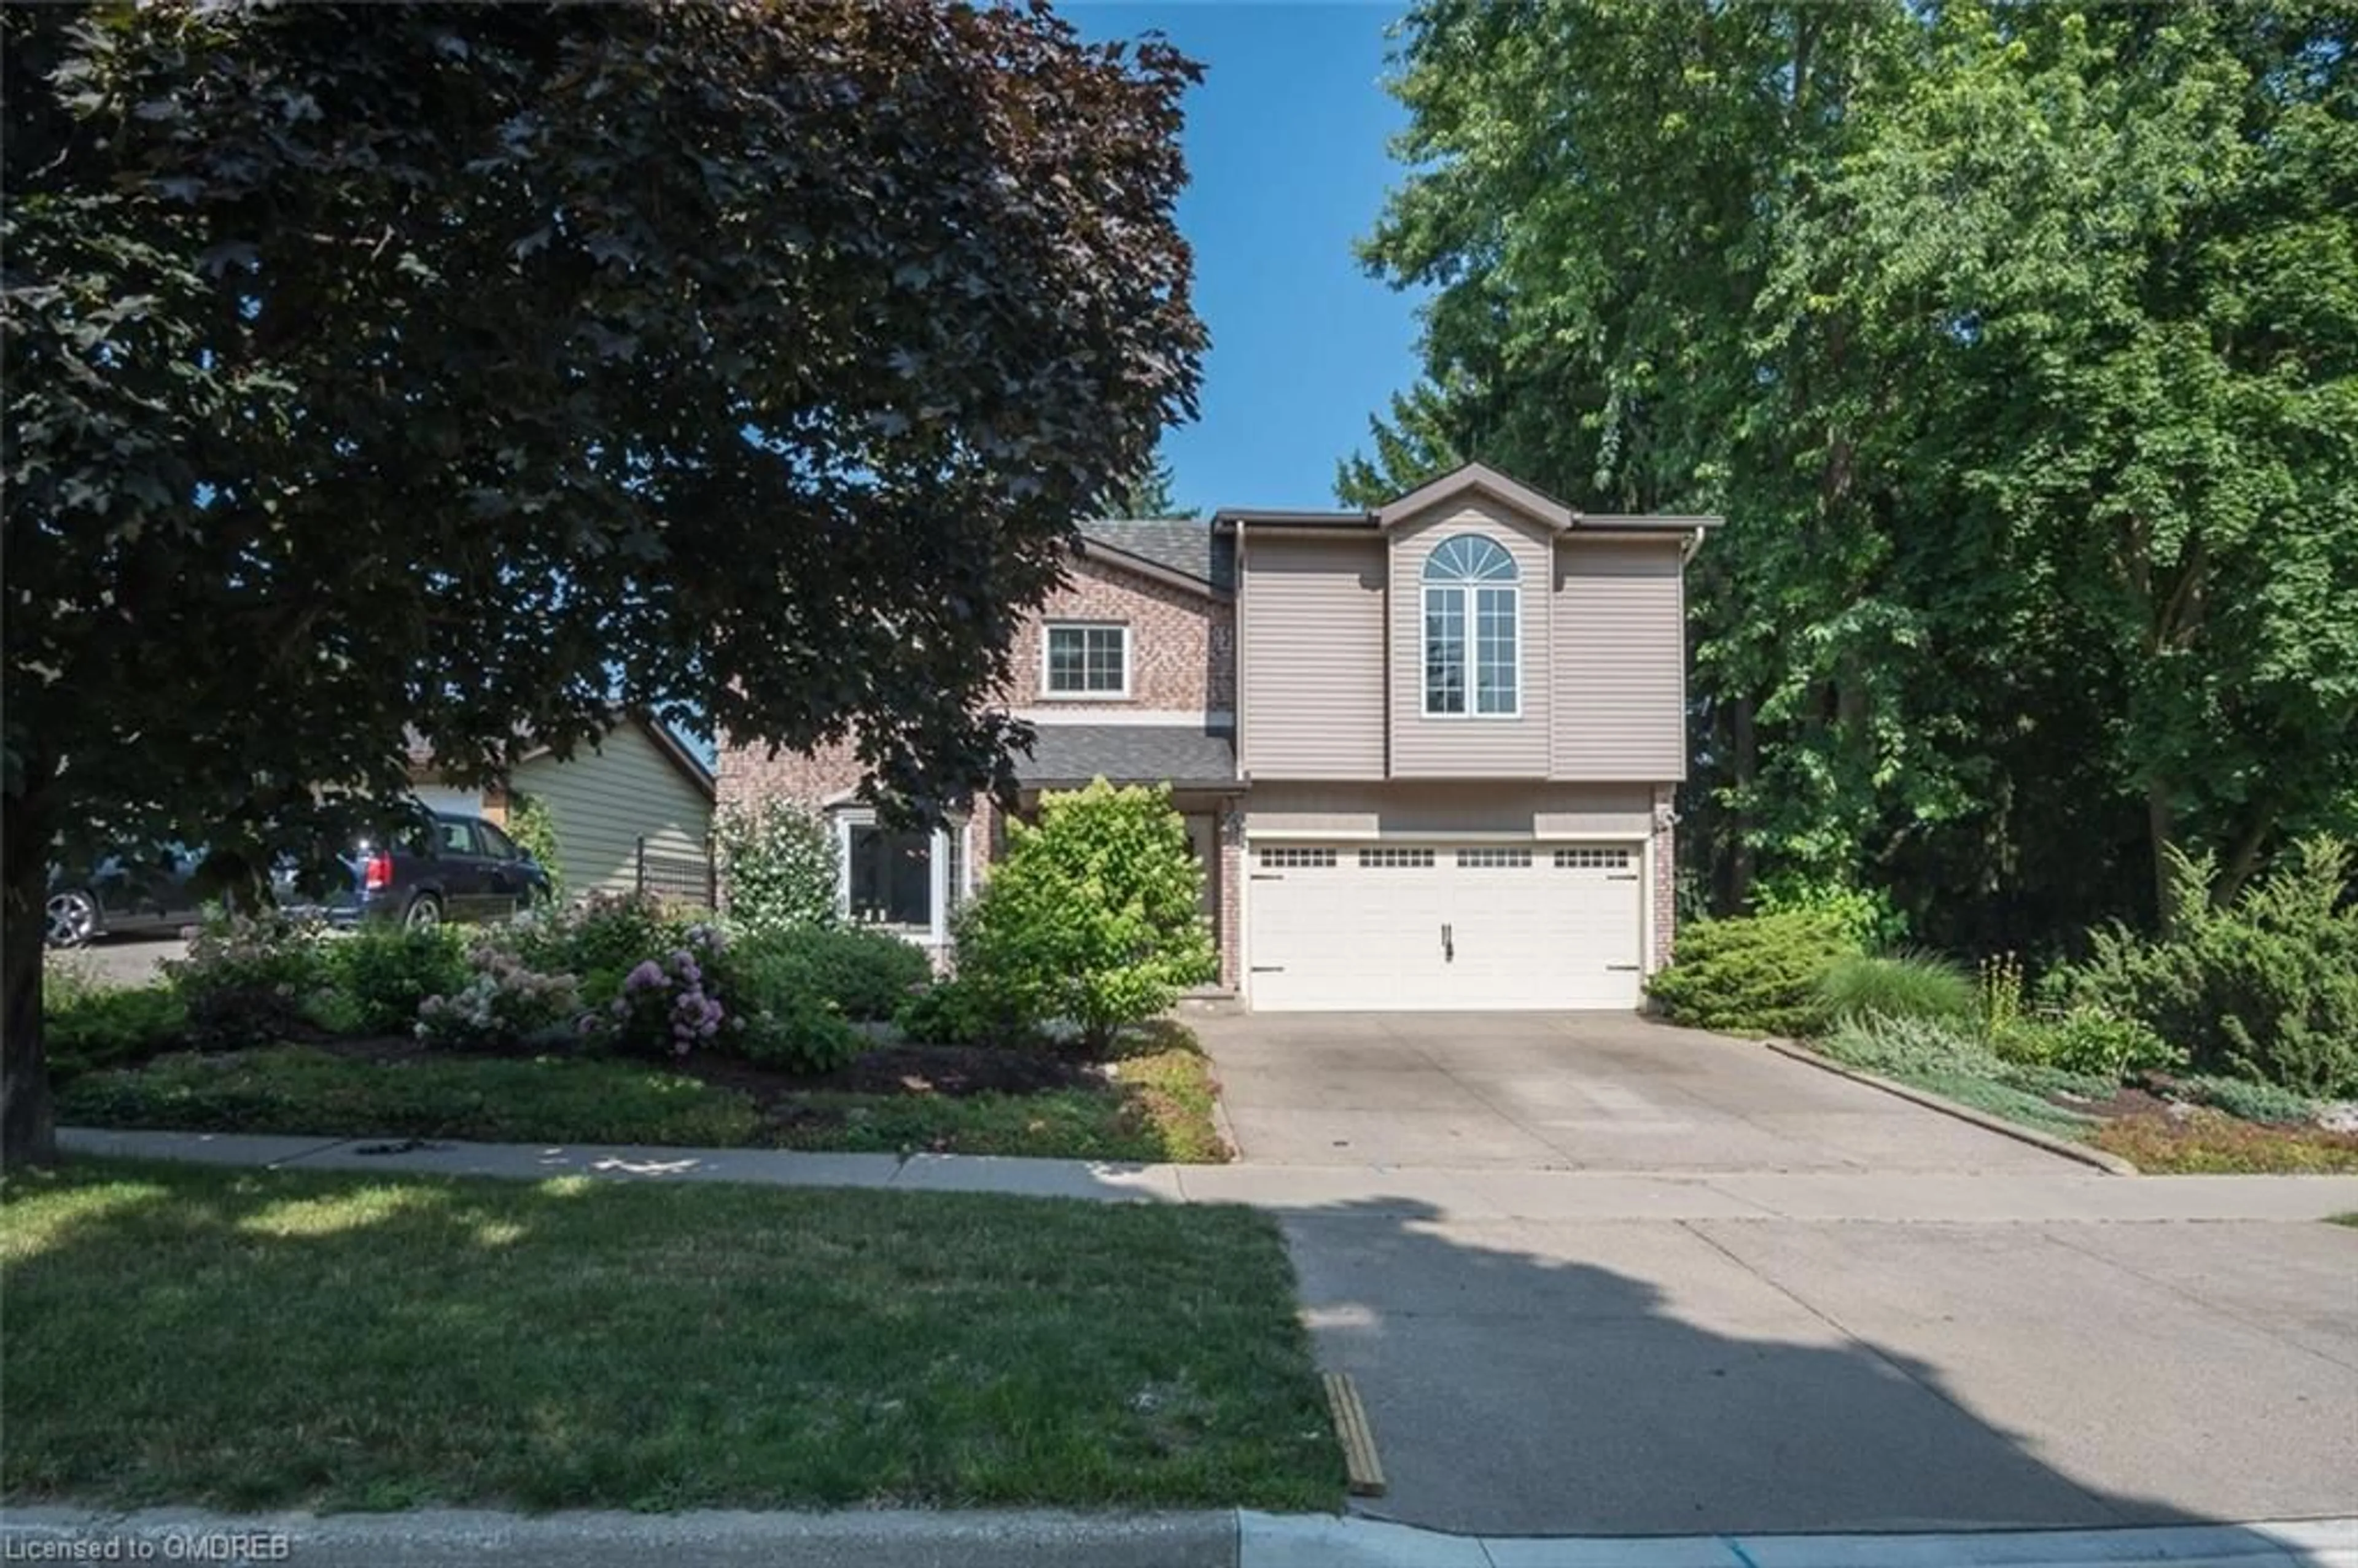 Frontside or backside of a home for 255 Morrison Rd, Kitchener Ontario N2A 2W6